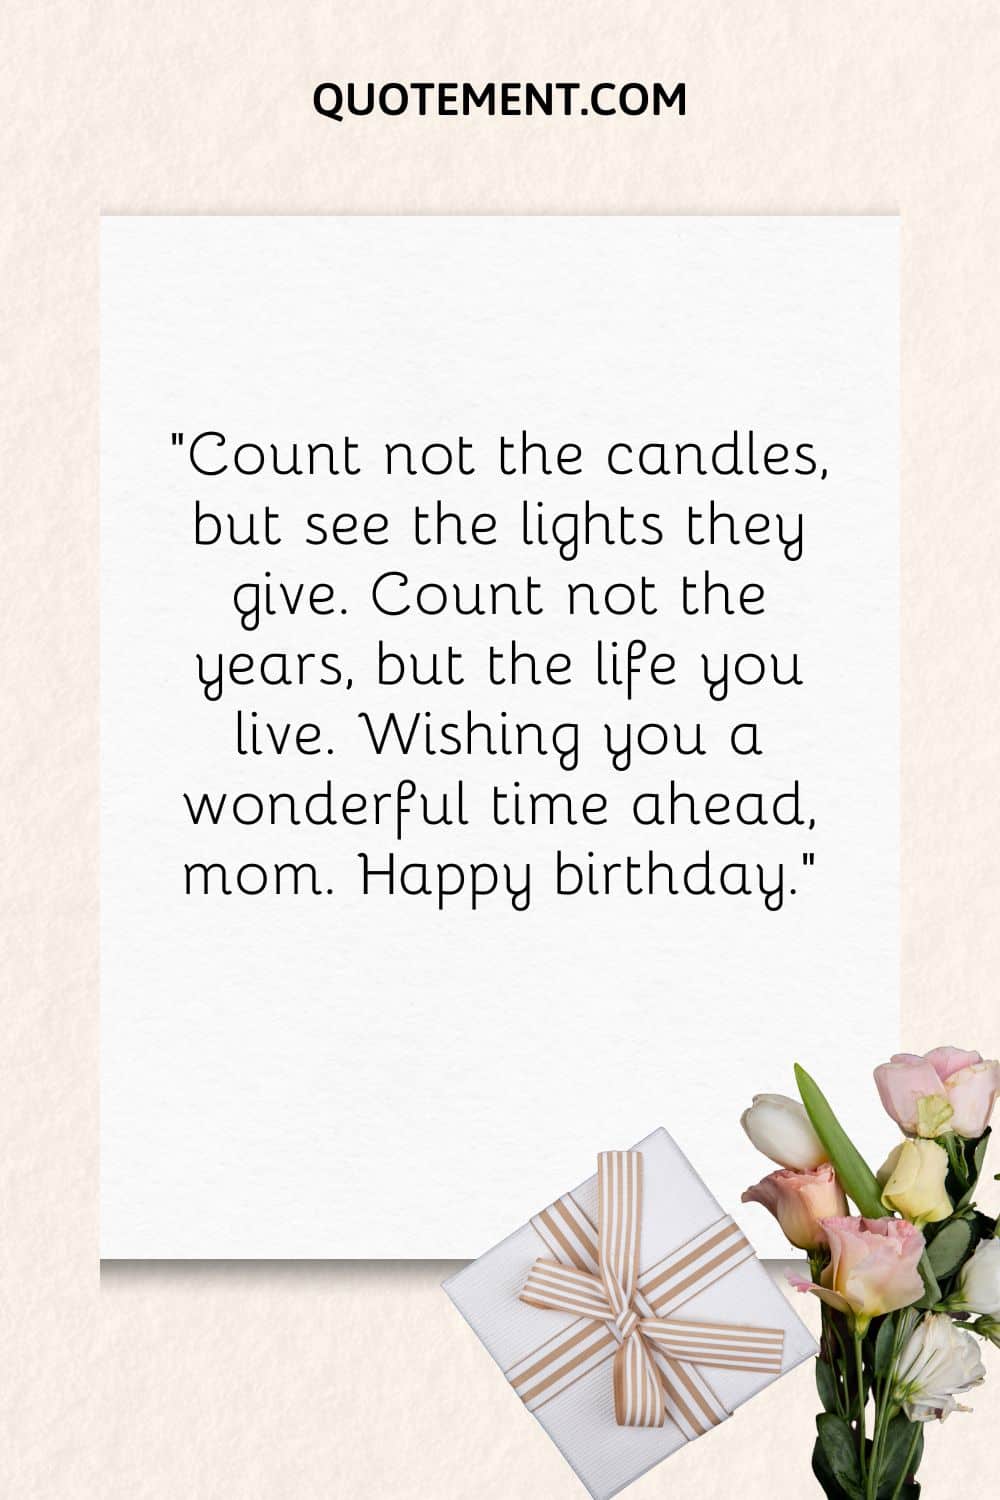 “Count not the candles, but see the lights they give. Count not the years, but the life you live. Wishing you a wonderful time ahead, mom. Happy birthday.”